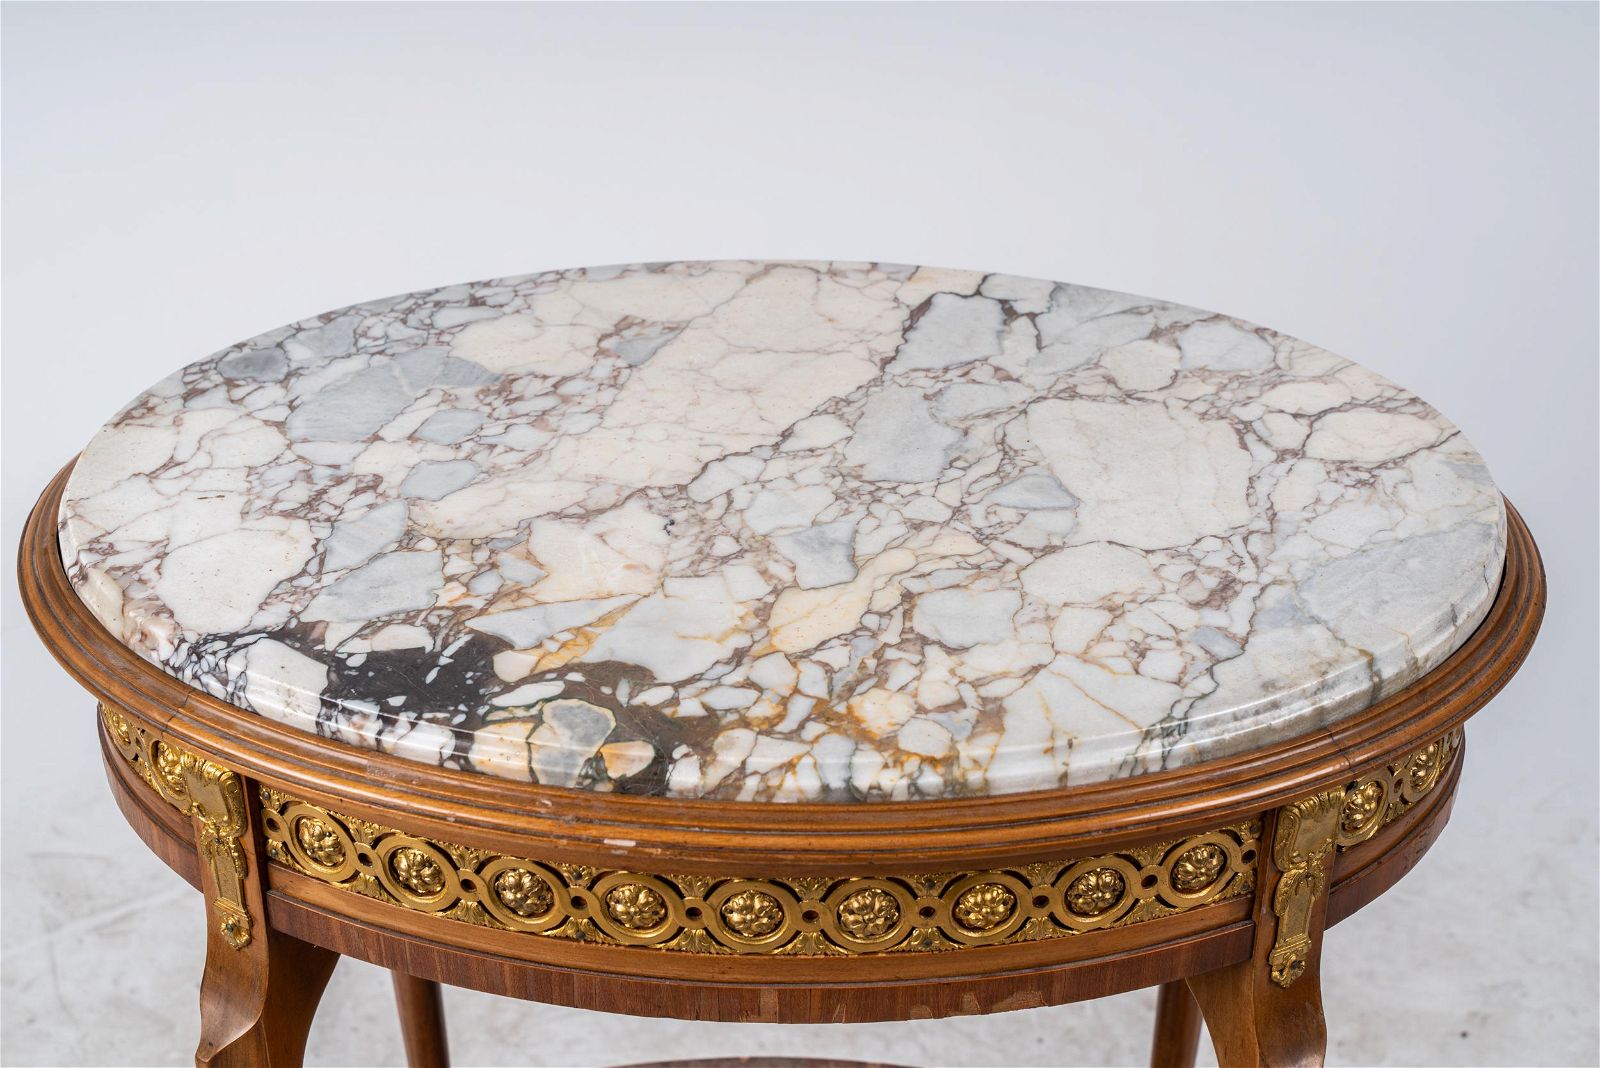 AF1-013: ANTIQUE LATE 19TH CENTURY LOUIS XV TRANSITIONAL STYLE FRENCH WALNUT MARBLE-INSET GUERIDON